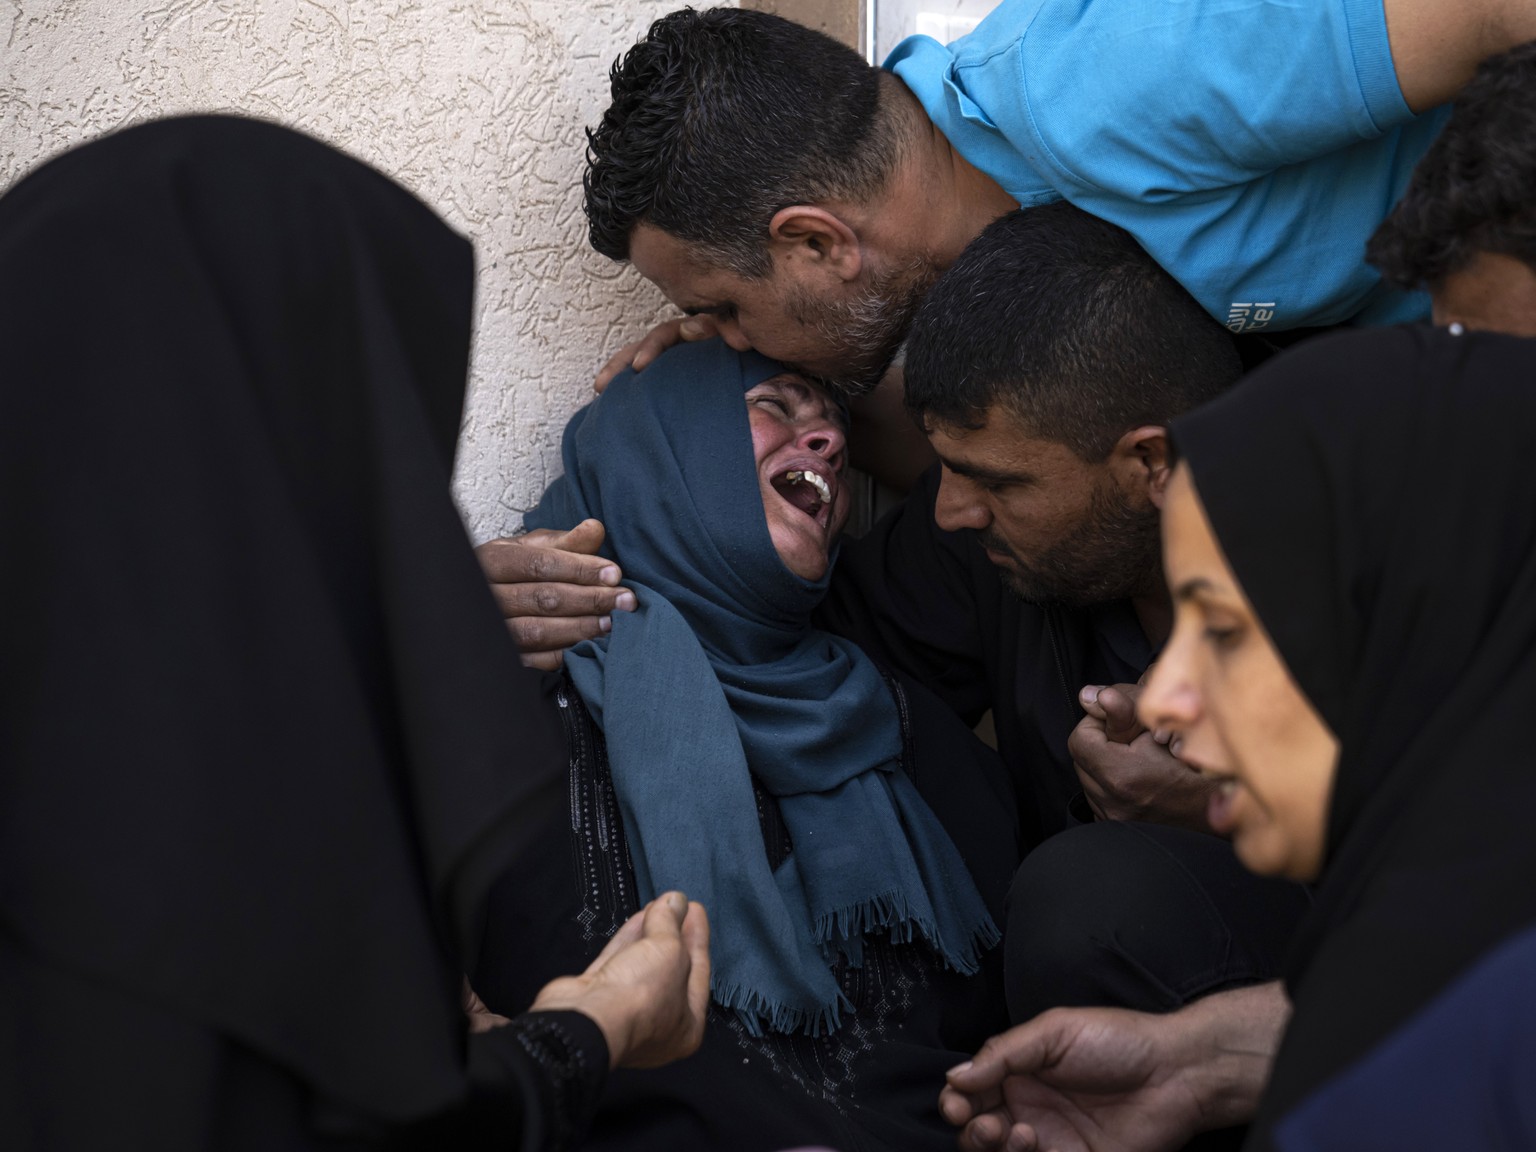 Palestinians mourn for Mohammed Abu Taima, killed in an Israeli airstrike, in Khan Younis in the Gaza Strip, Wednesday, May 10, 2023. Israeli authorities say Palestinian militants in the Gaza Strip ha ...